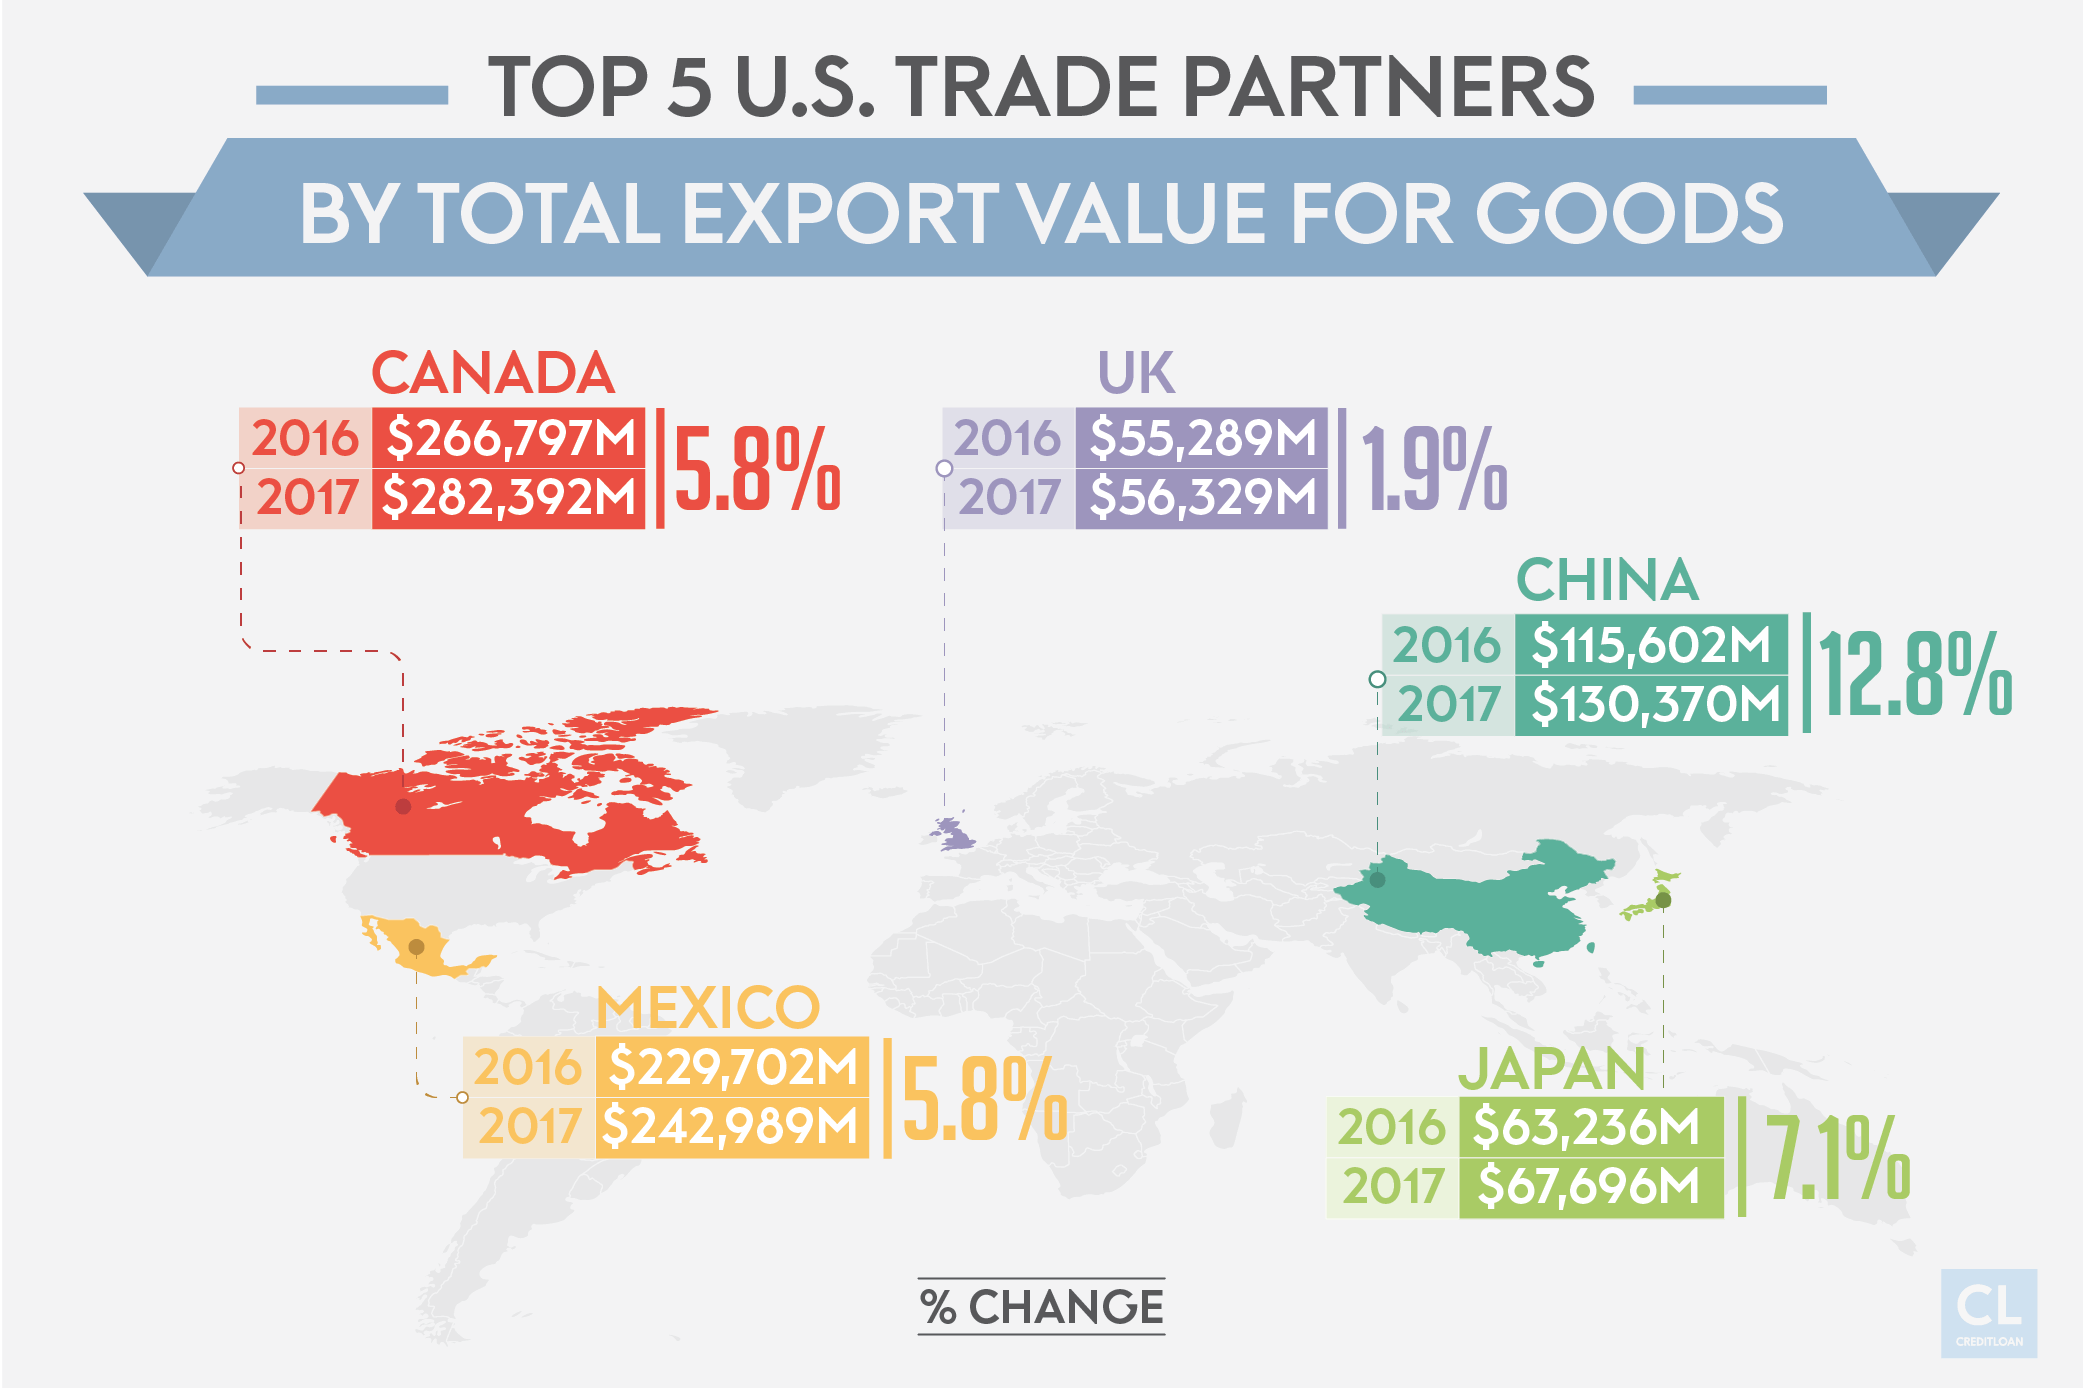 Top 5 U.S. Trade Partners By Total Export Value for Goods